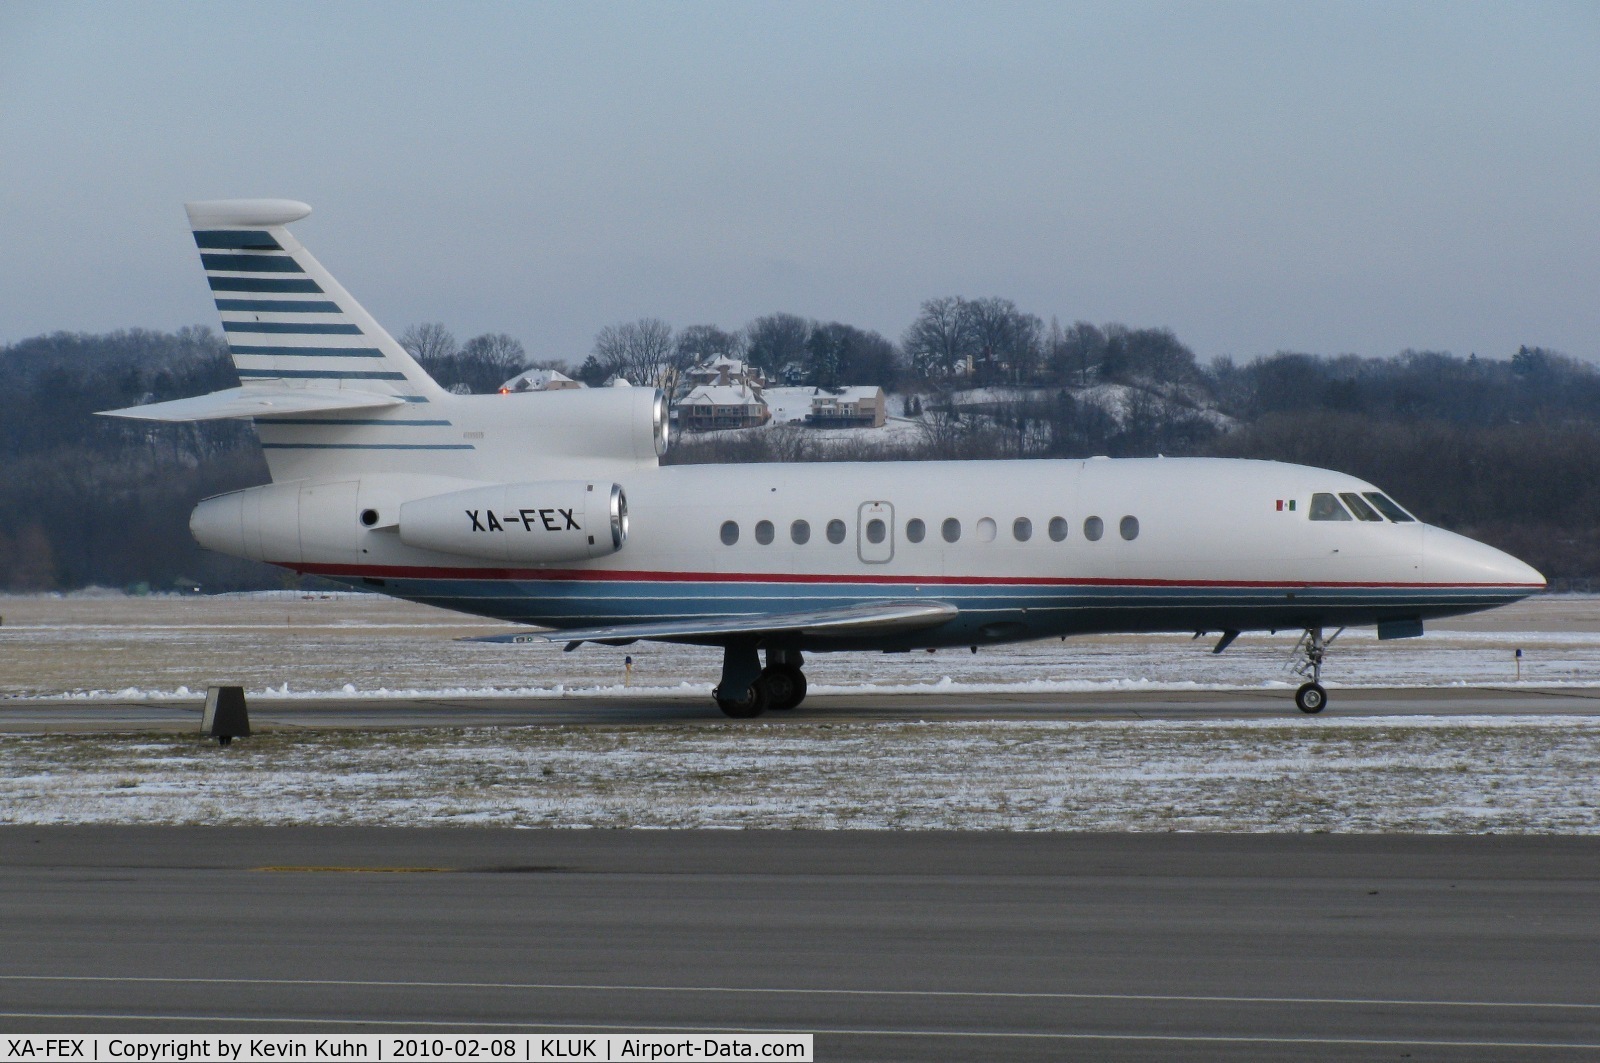 XA-FEX, 1999 Dassault Falcon 900EX C/N 46, A Mexican visitor arriving via Laredo, Texas on an extremely cold day.